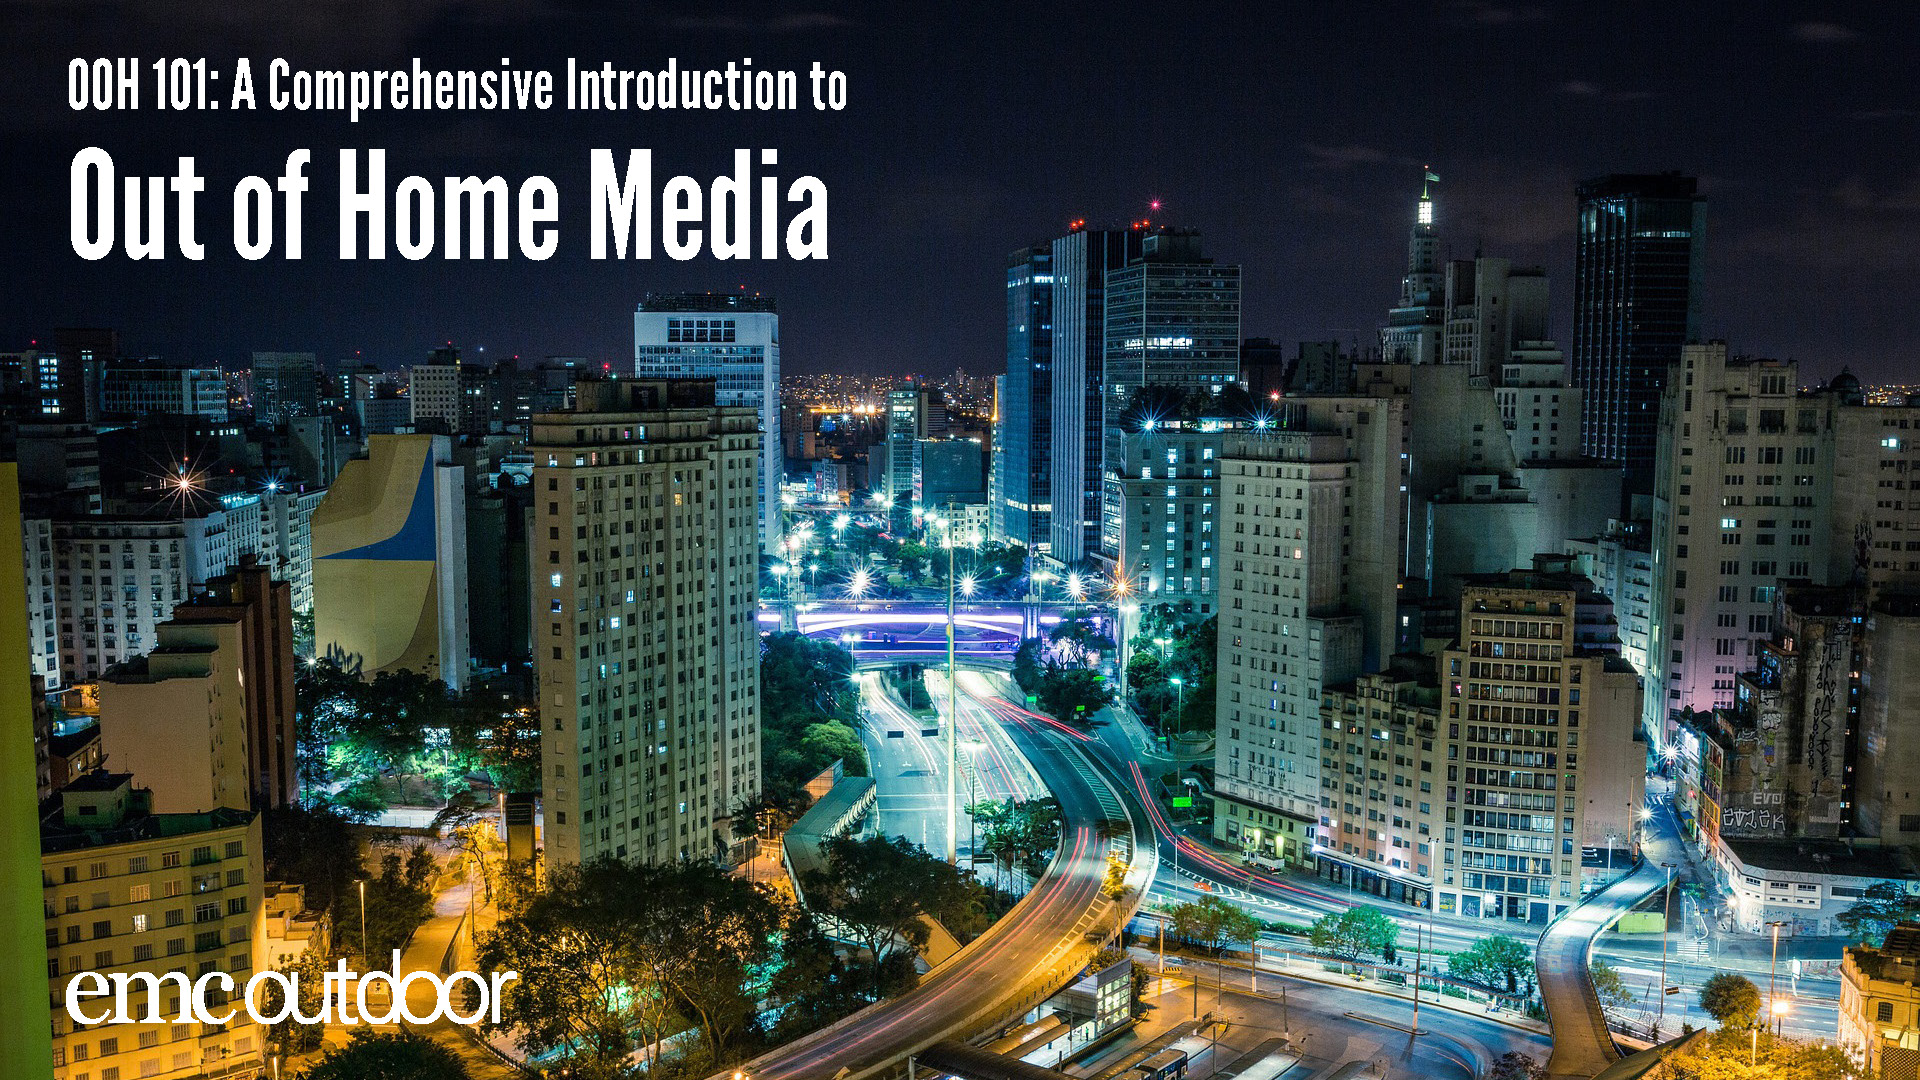 OOH 101: A Comprehensive Introduction to Out of Home Media [Ebook]